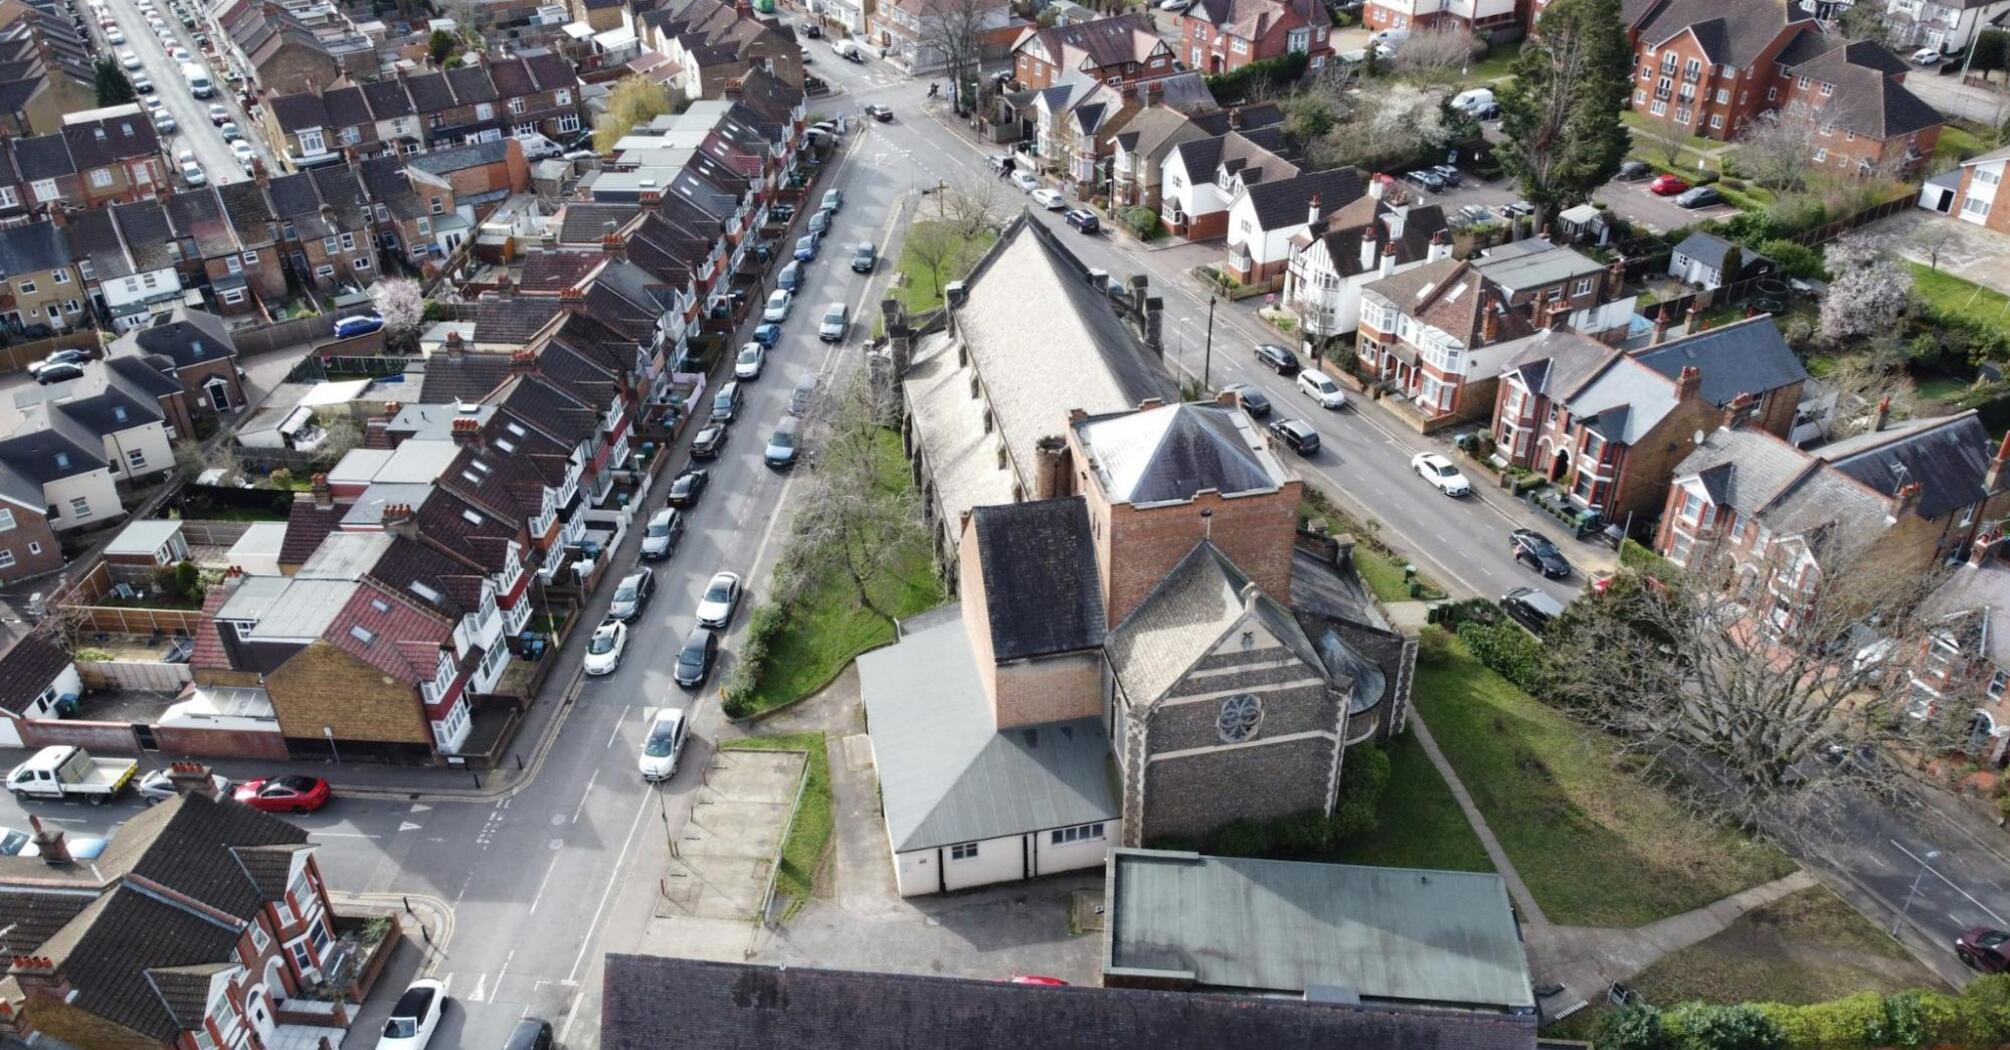 Aerial view of a residential neighborhood in Watford with a mix of houses and a church